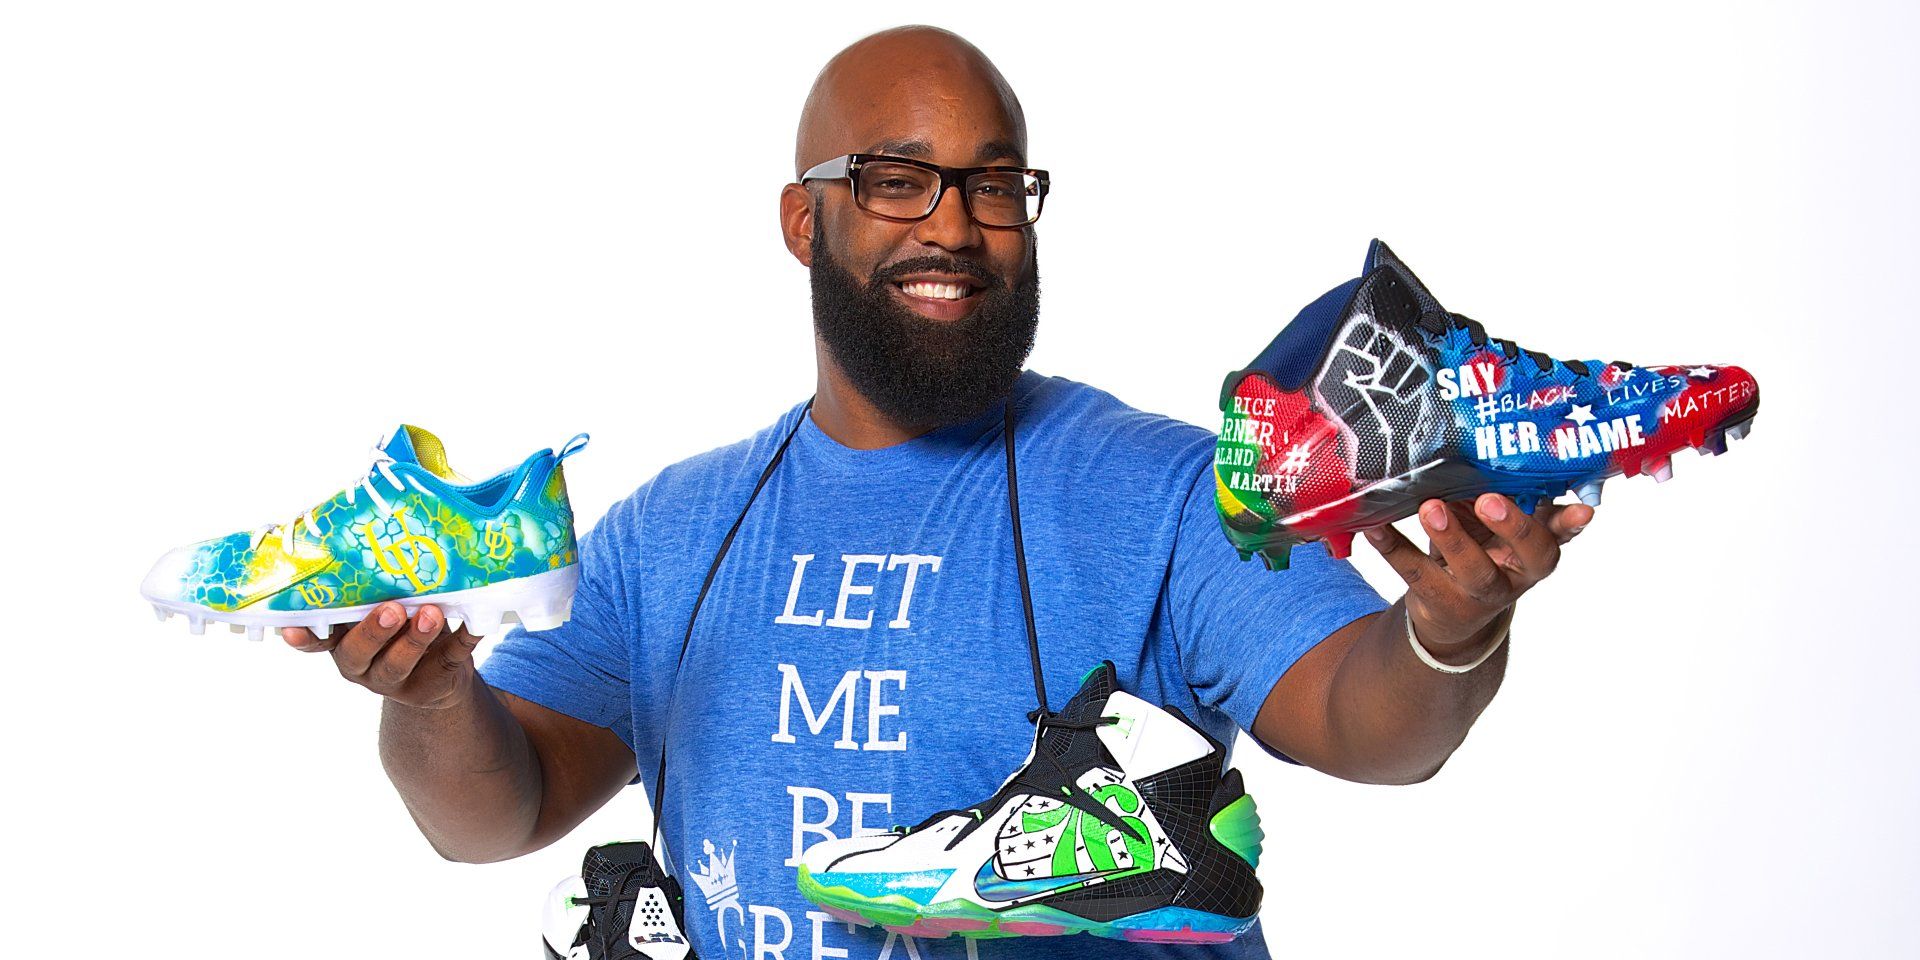 Eric Dorsey of Illustrative Cre8ions Poses With His Custom Cleats